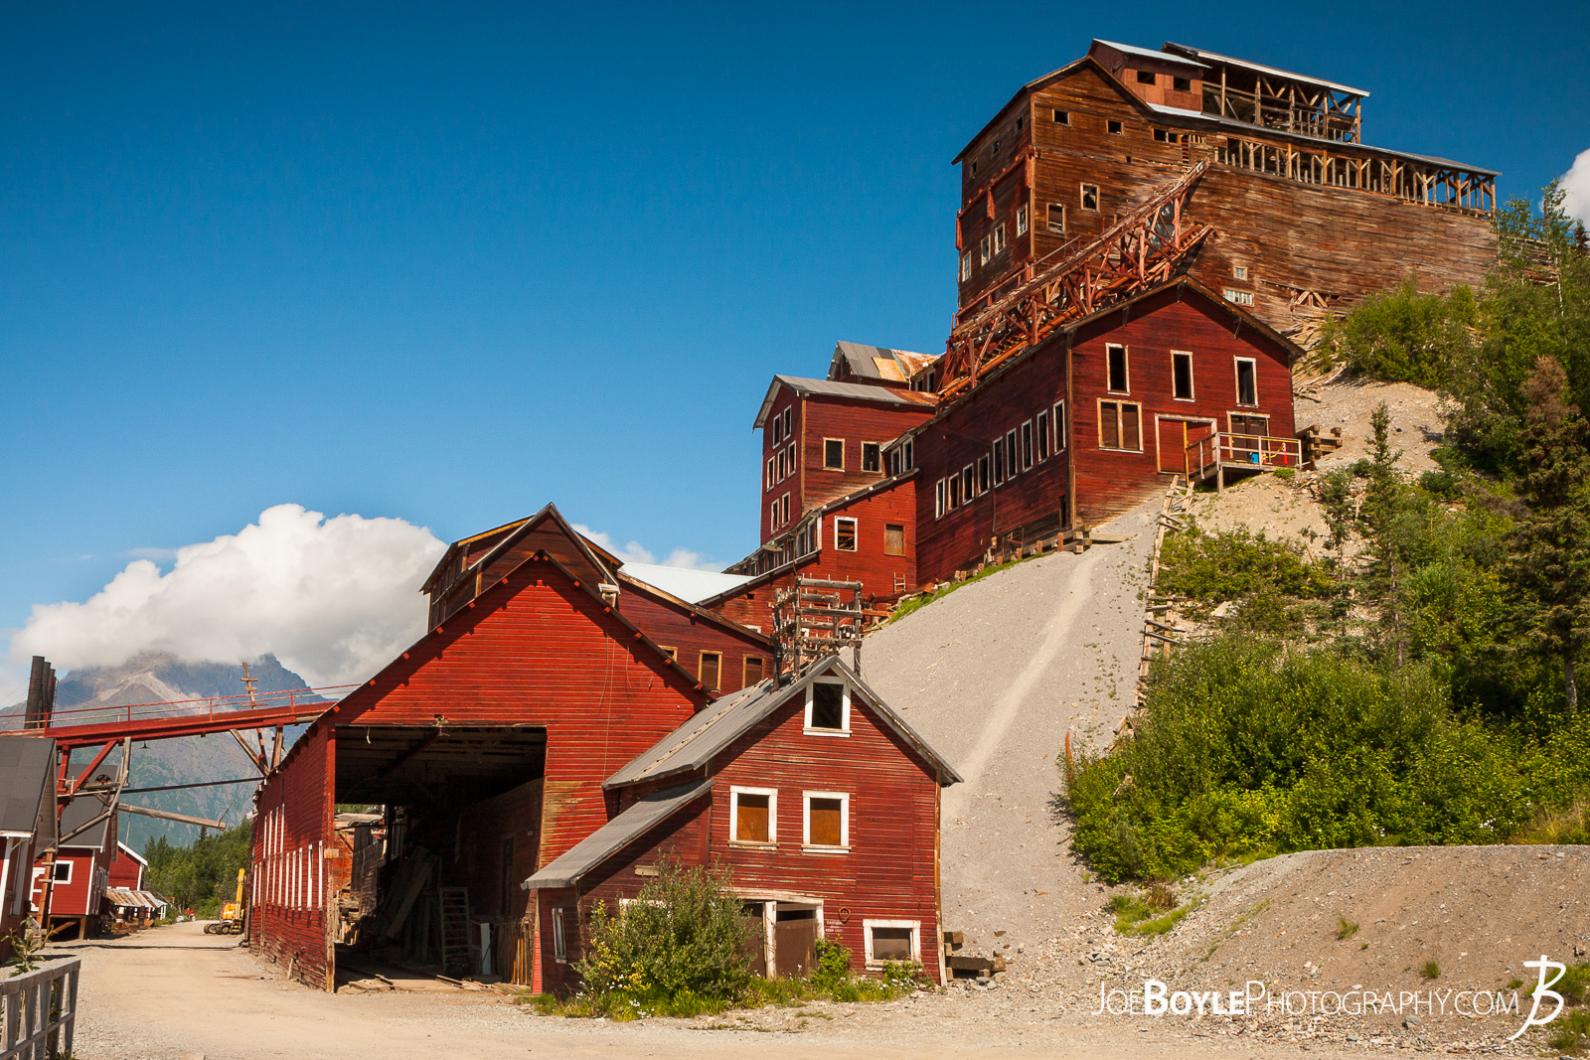 My hiking buddy and myself did some backpacking at Wrangell St. Elias National Park. Here is a photo of the old historic Kennicott copper mine just north of McCarthy.